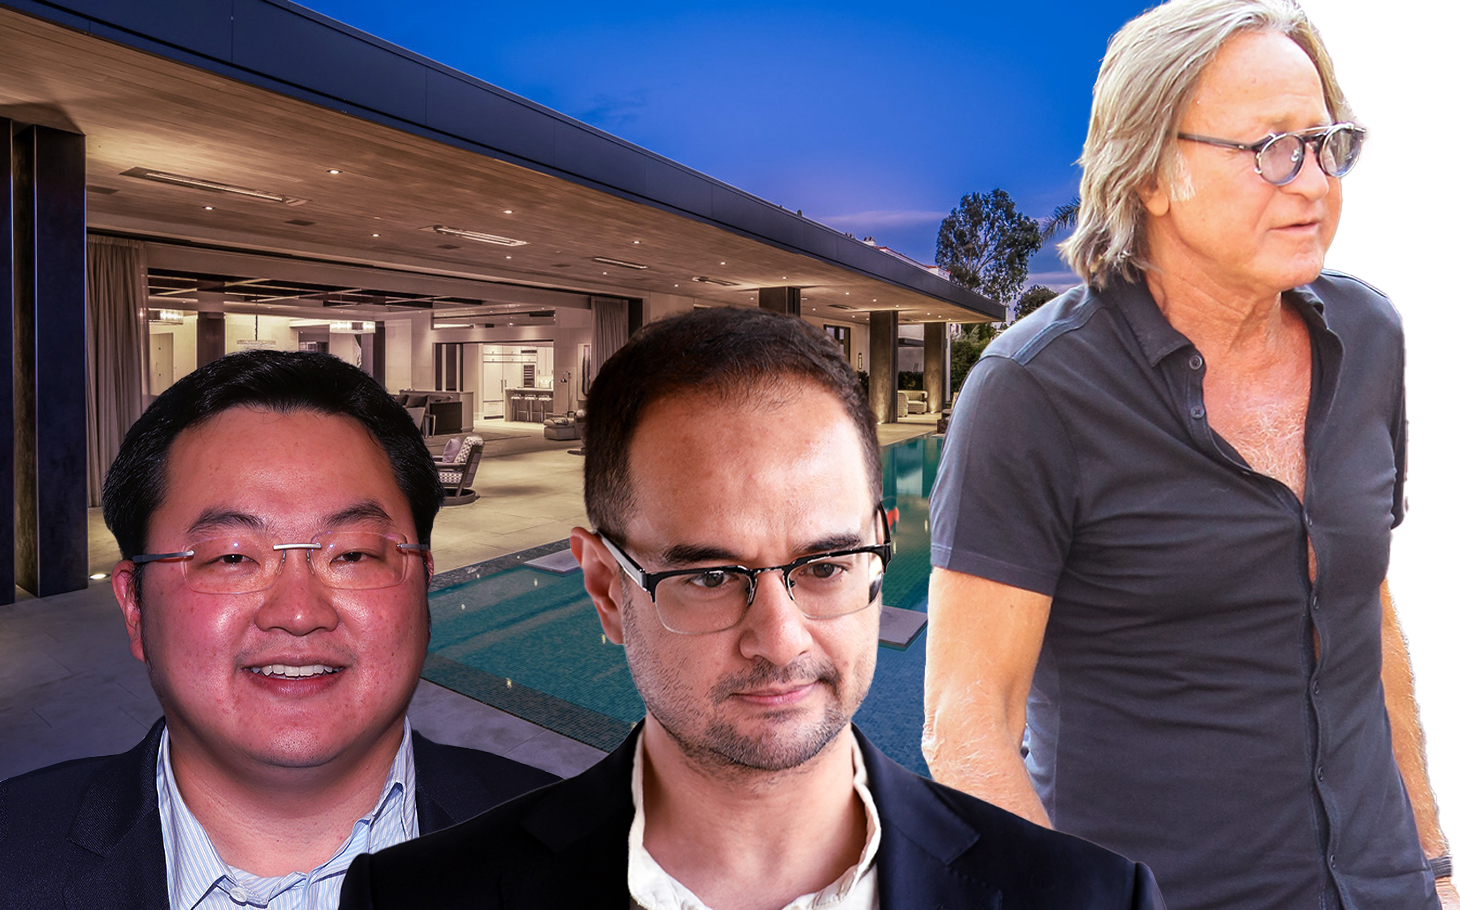 Jho Low, Riza Aziz and Mohamed Hadid with the Trousdale Estates mansion (Photos via Getty, Redfin)